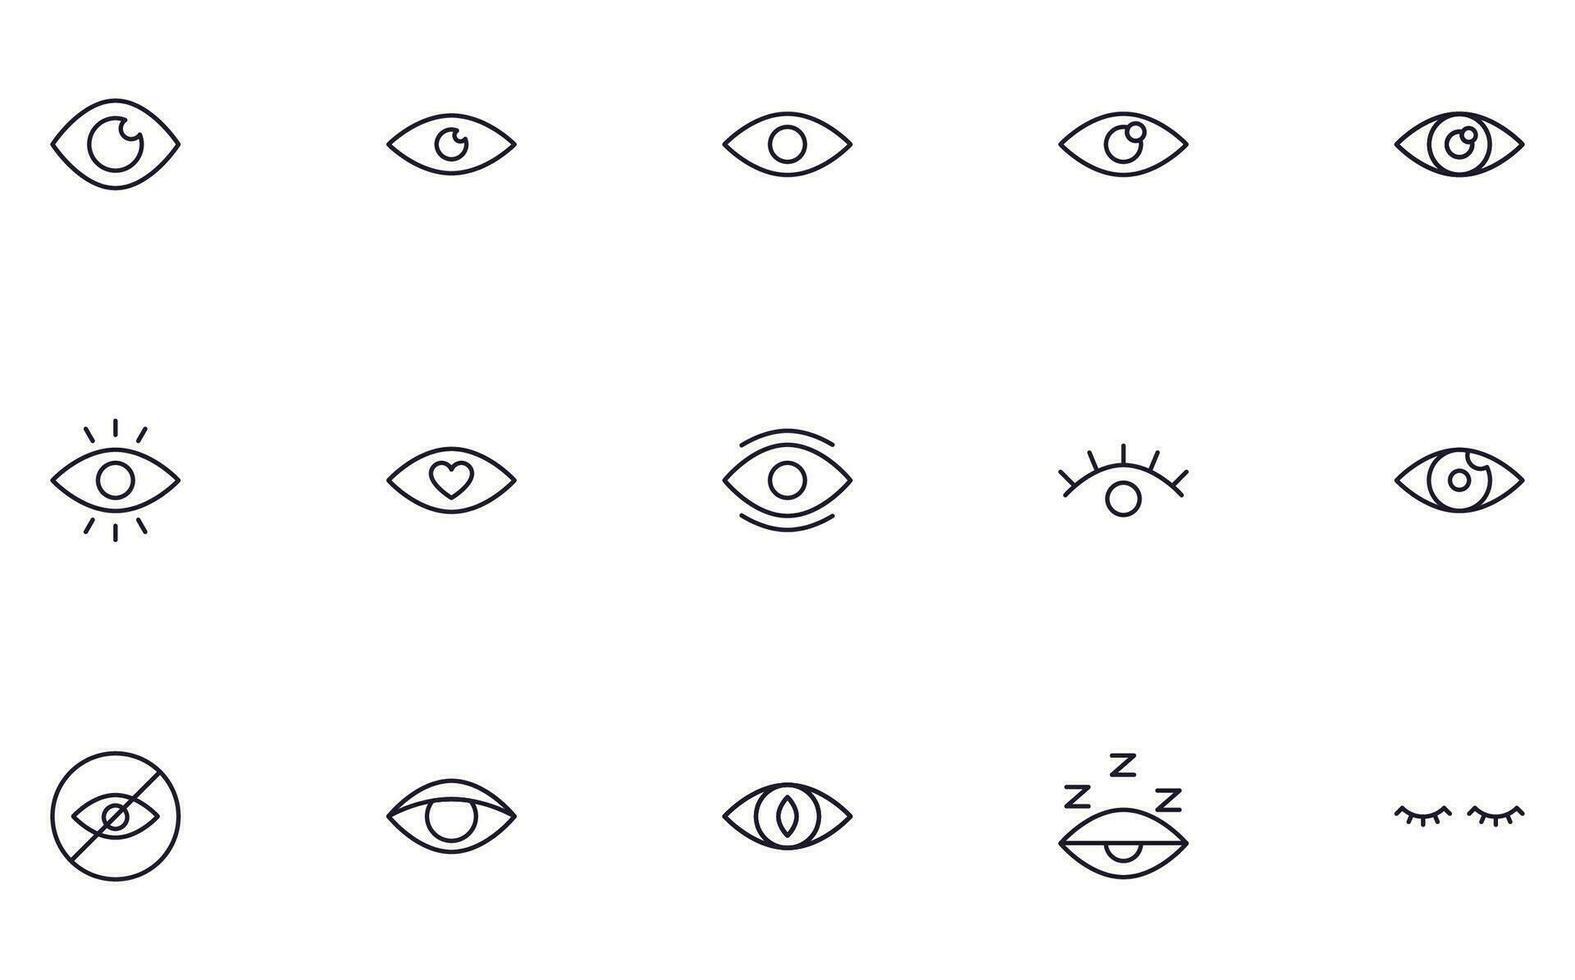 Eye concept. Collection of eye high quality vector outline signs for web pages, books, online stores, flyers, banners etc. Set of premium illustrations isolated on white background